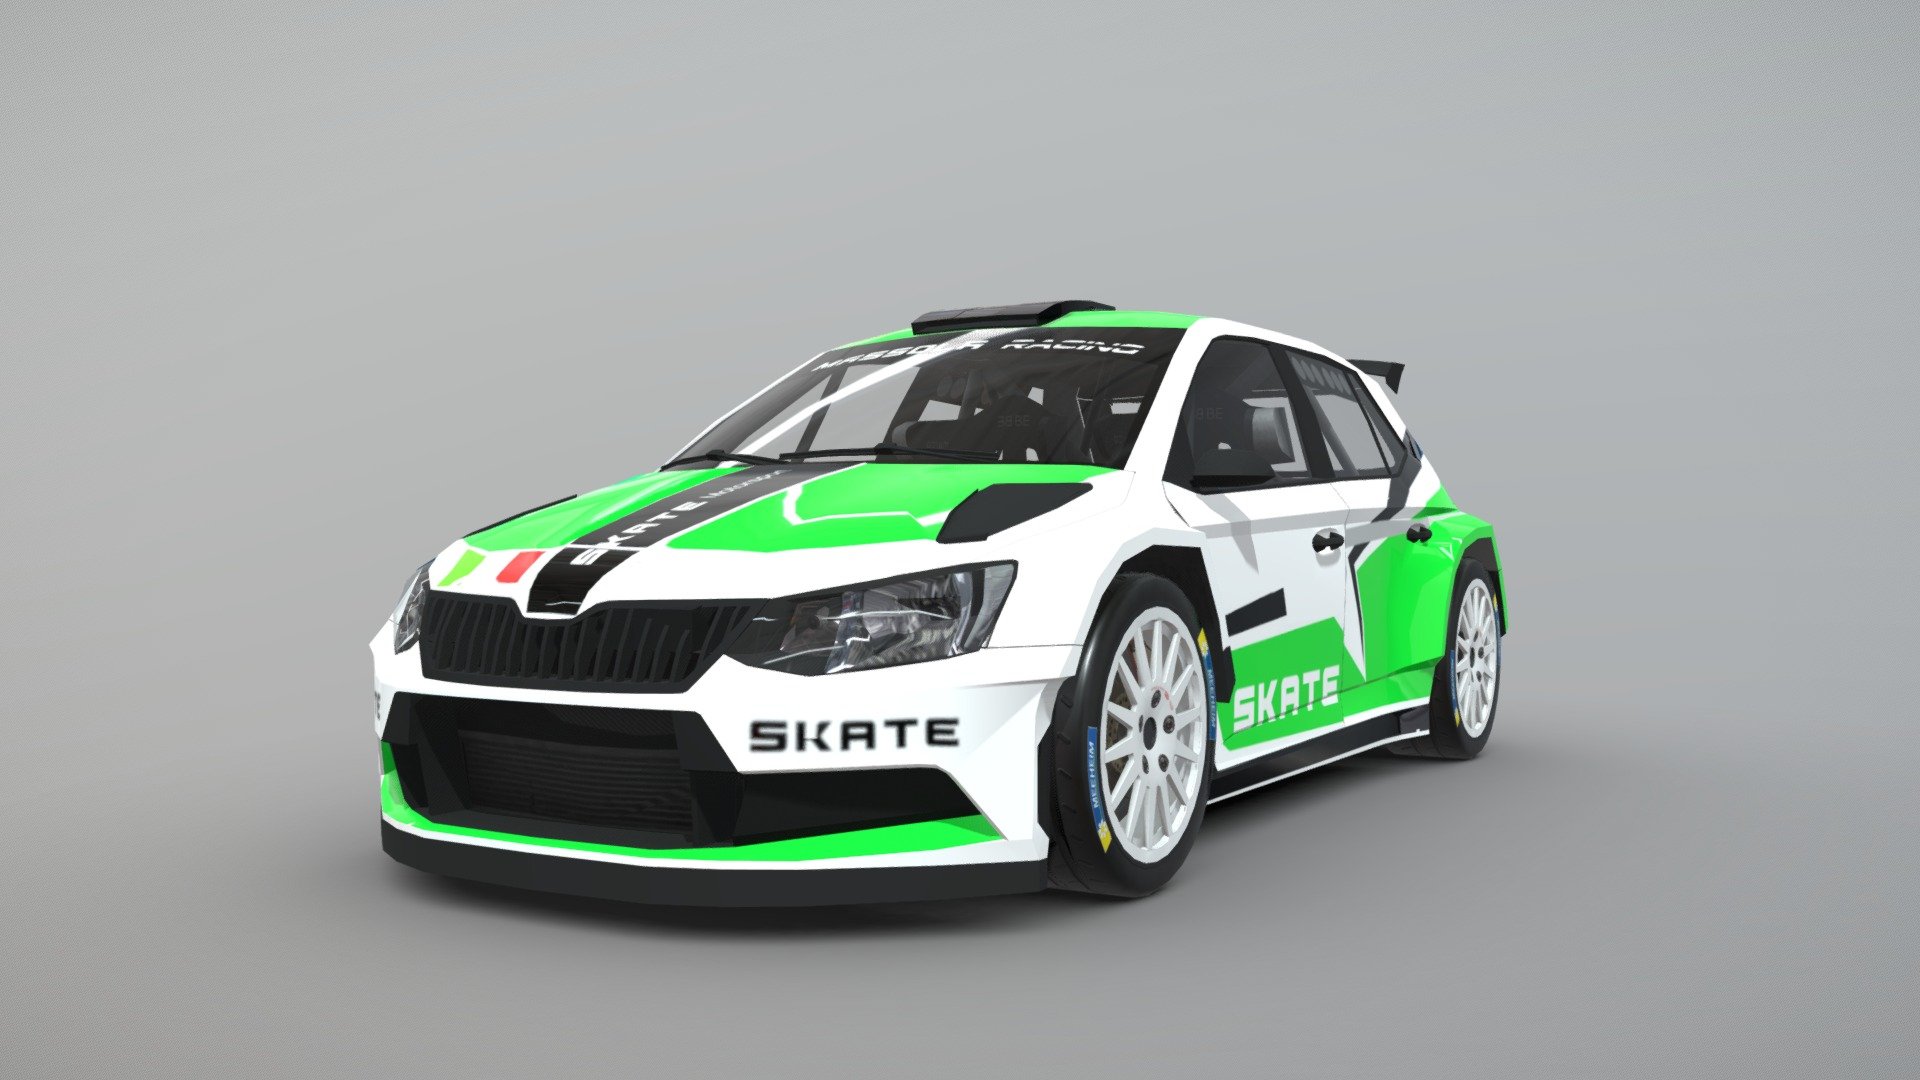 Get it in the Unity Asset Store!
A realistic rally car optimized for a mobile racing game with detailed interiors and single door, paradish, trunk objects to make them open/close or brake&hellip;

-You can find an UV Image and baked shadows to make your own livery designs!:) - Rally Car Pro 6 - 3D model by Massola Racing (@massolaracing) 3d model